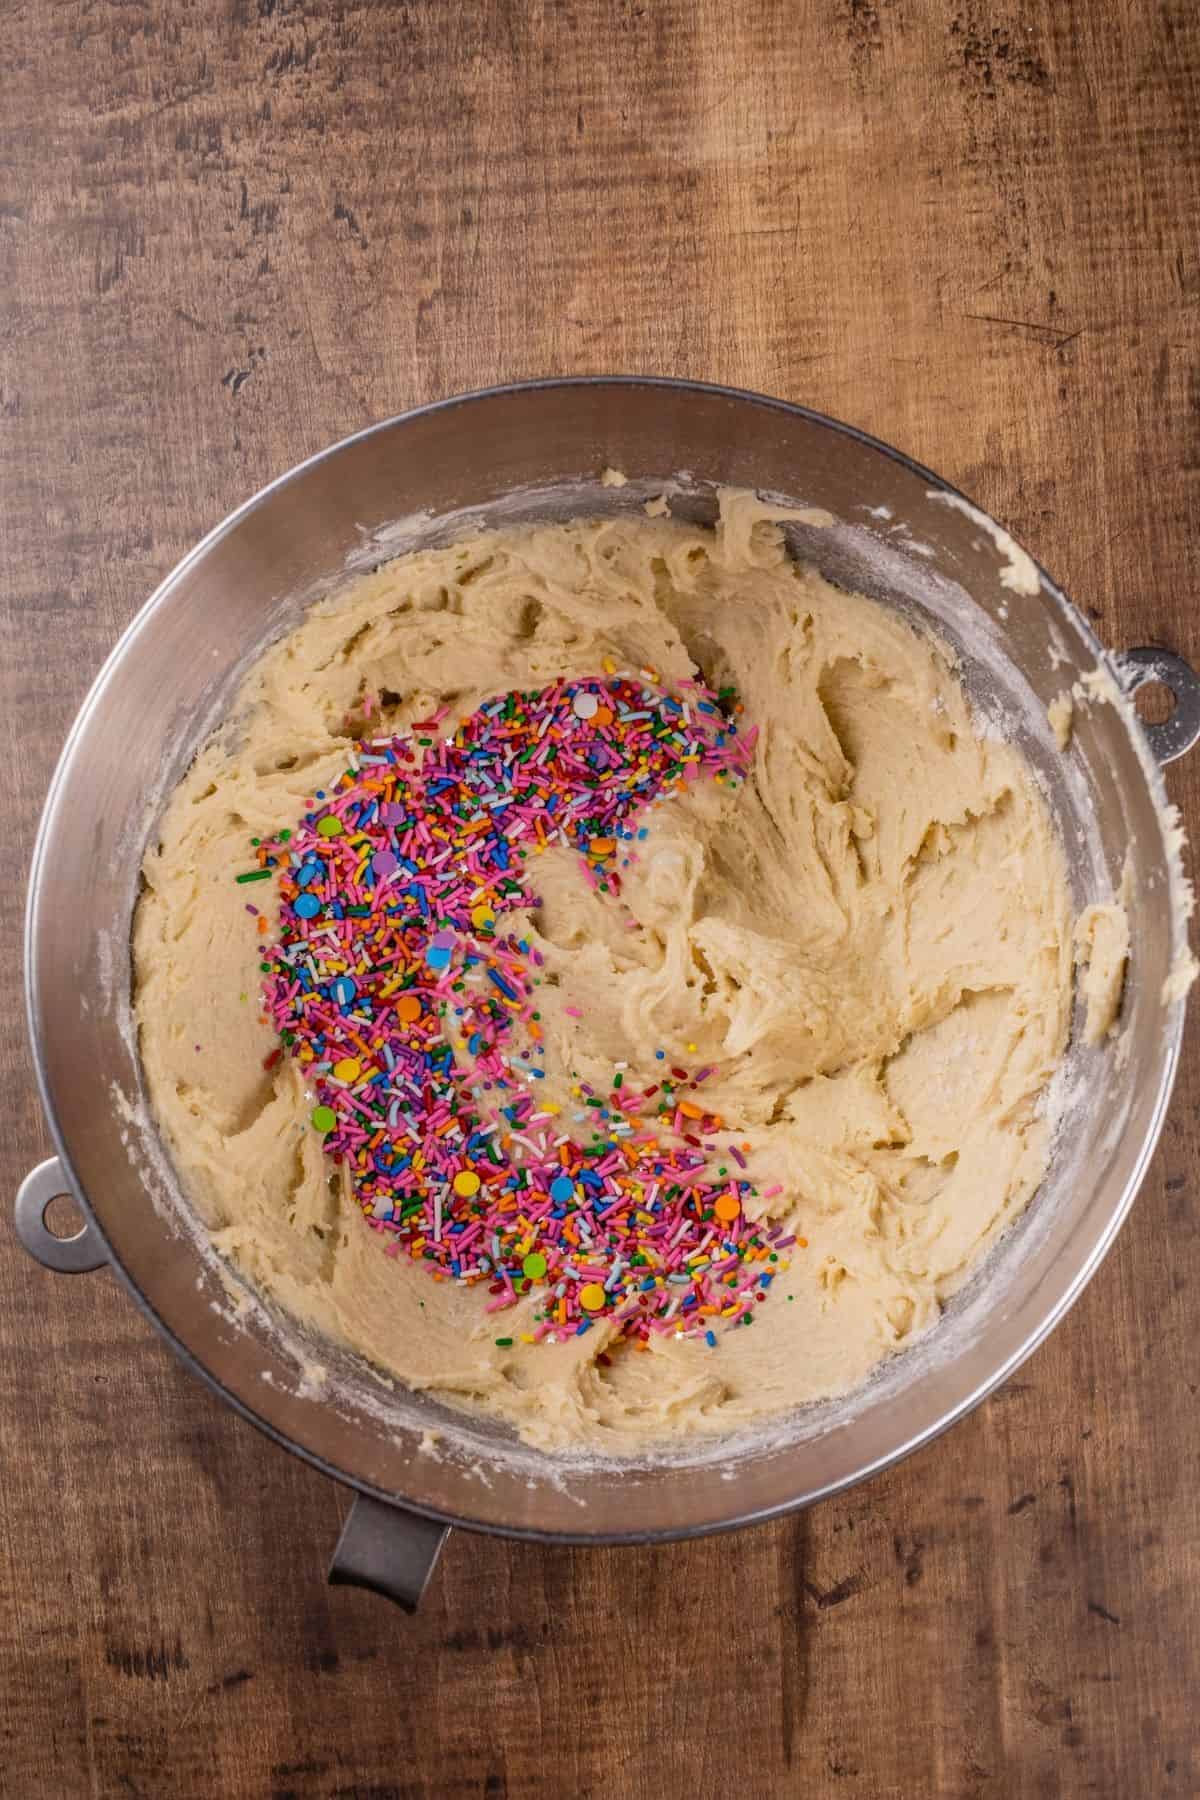 adding sprinkles to the finished cookie dough in a silver mixing bowl